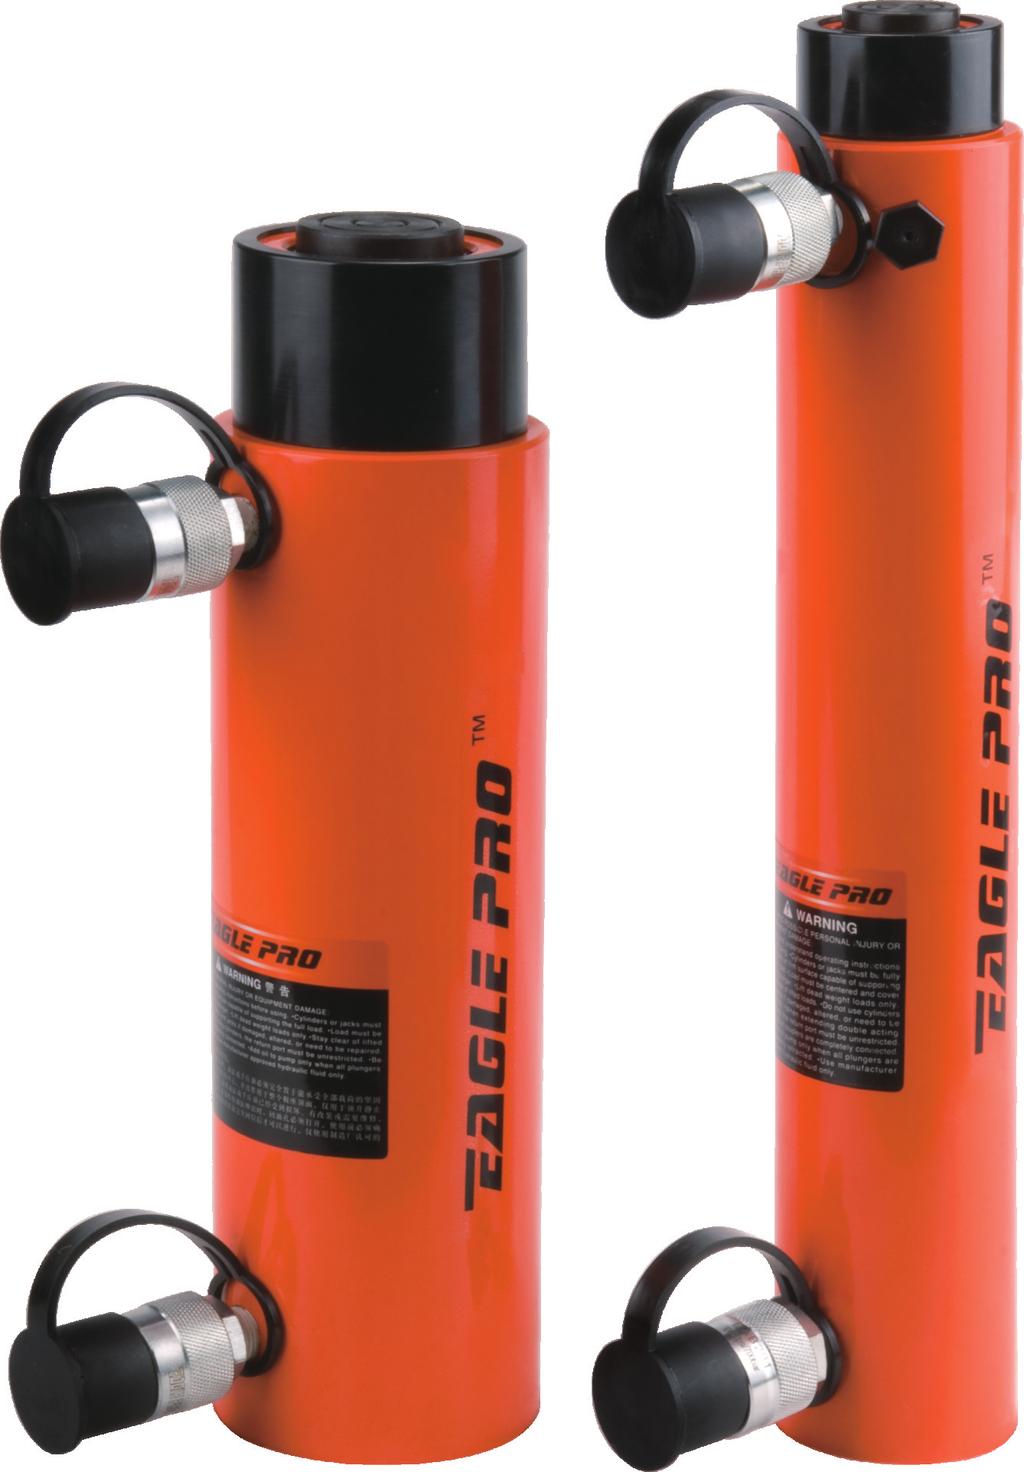 PDC Series Double Acting Cylinders Features 1. Complies to ASME B-30.1. High strength alloy steel for durability and added safety 2. Double acting operation for fast retraction 3.